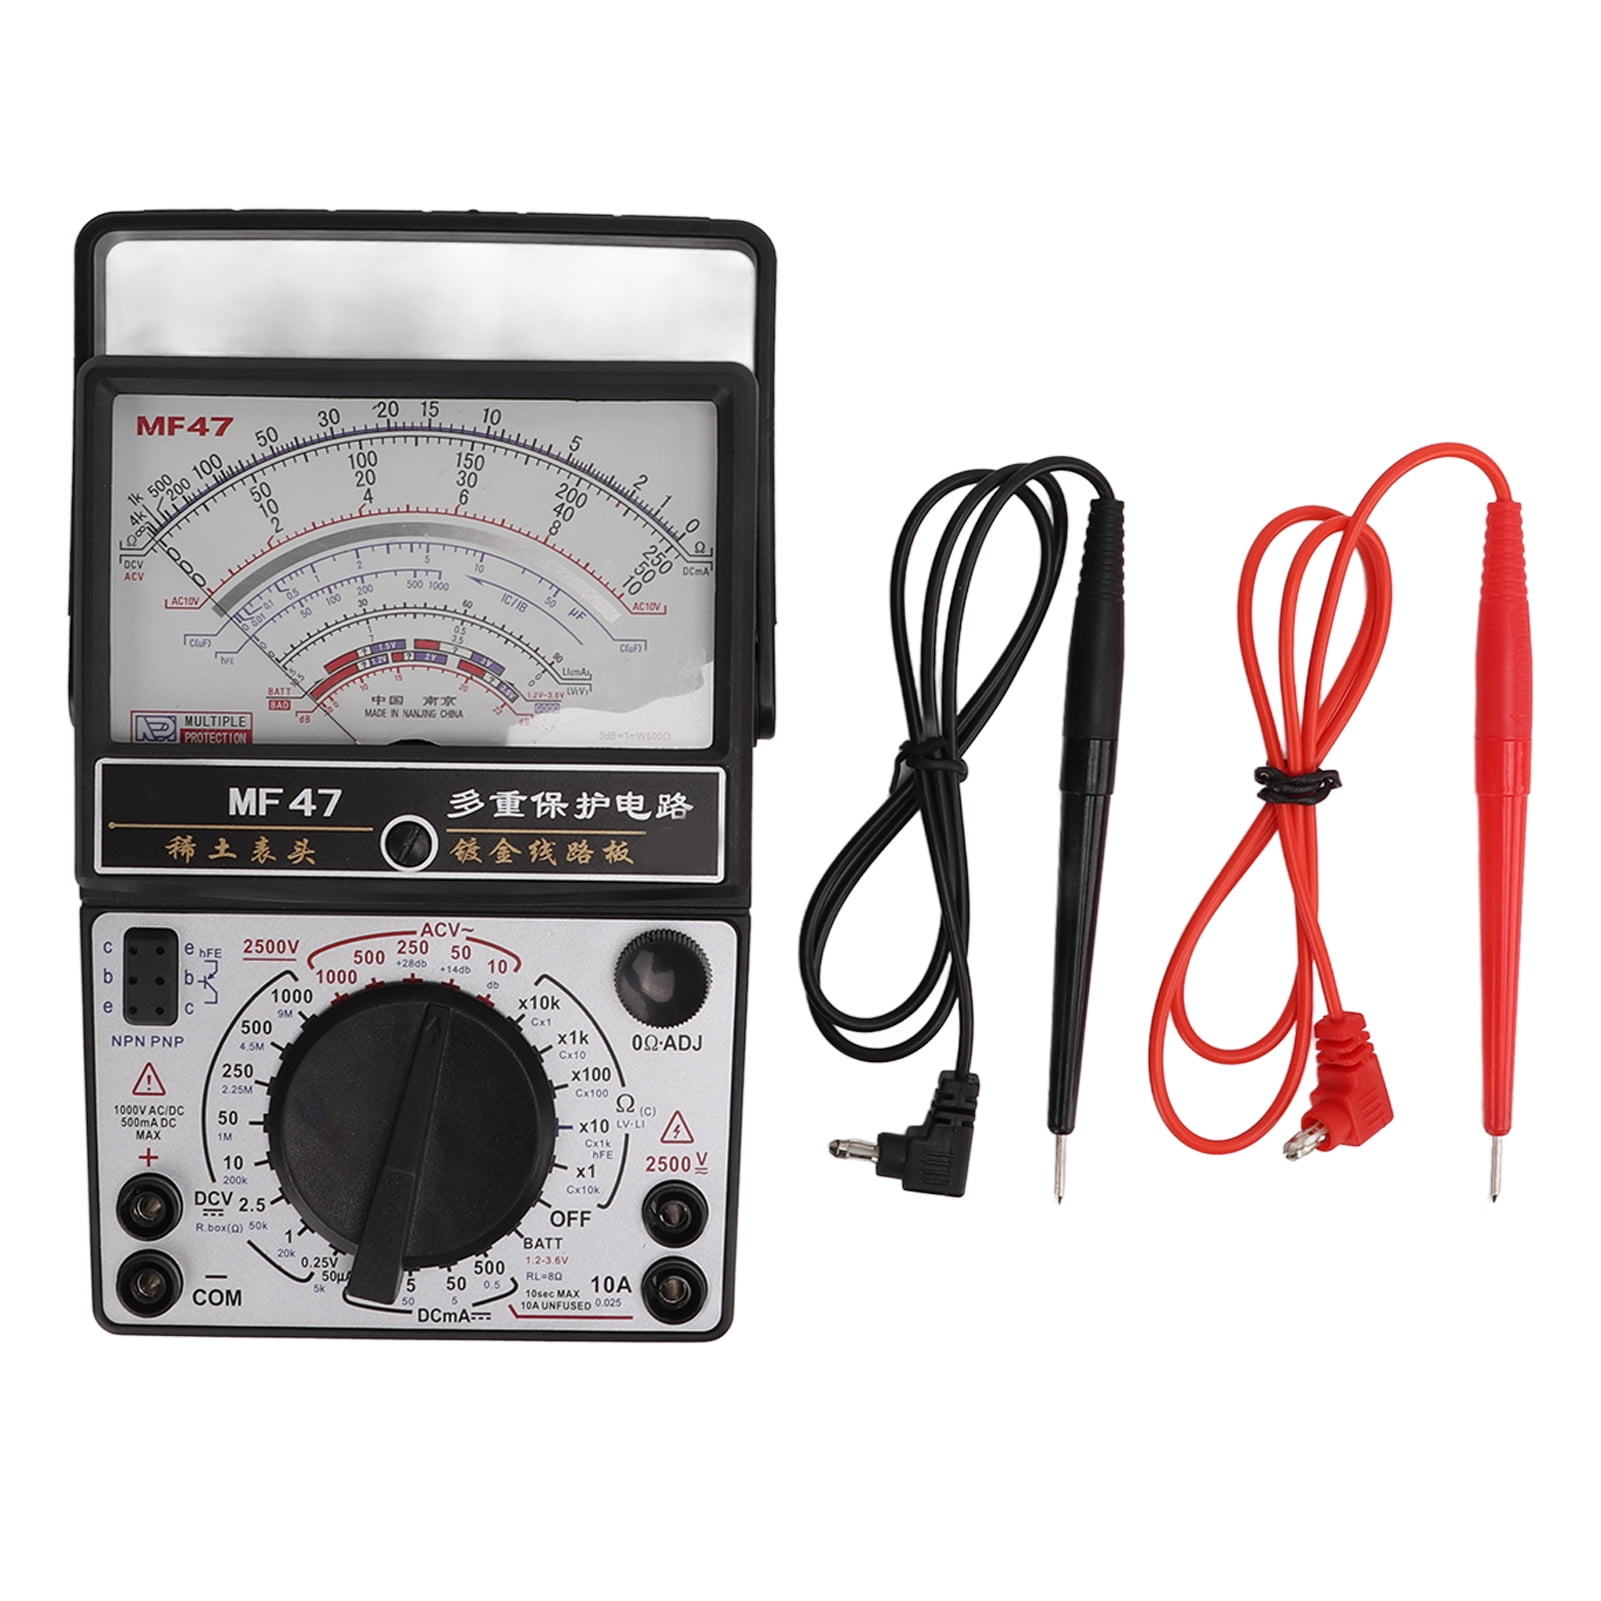 Analogue Meter Multimeter, Amp Volt Ohm Voltage Tester Meter and Diode  Continuity Test, Accurately Measures Voltage Current Amp Resistance  Capacitance